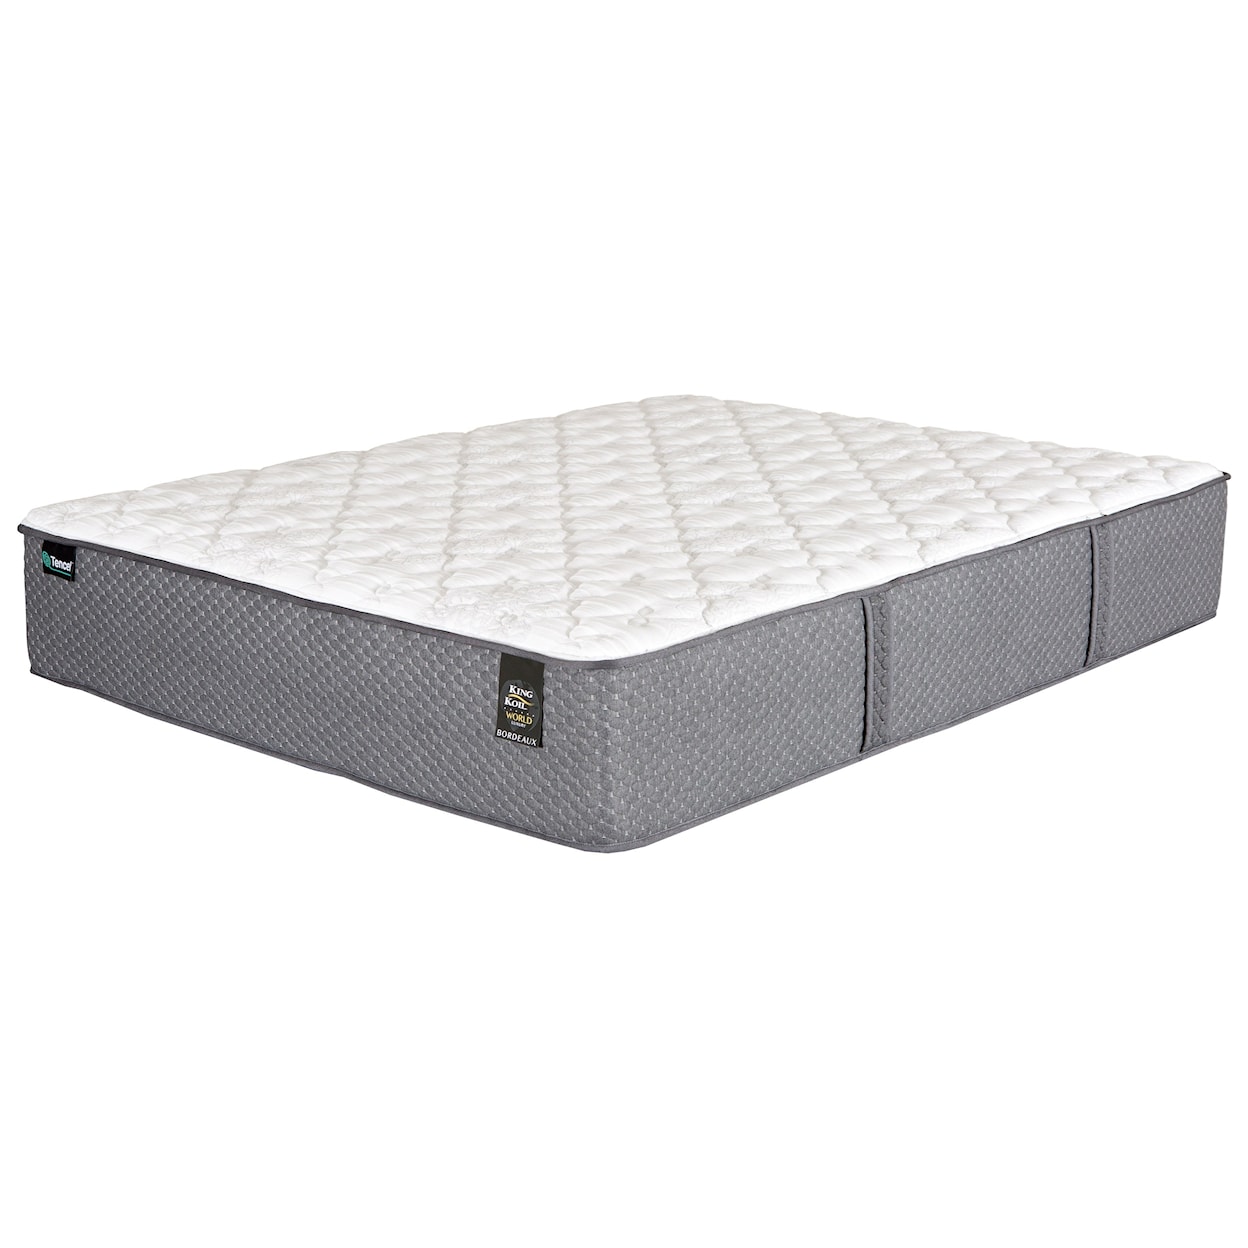 King Koil Beaumont EF Queen Pocketed Coil Mattress